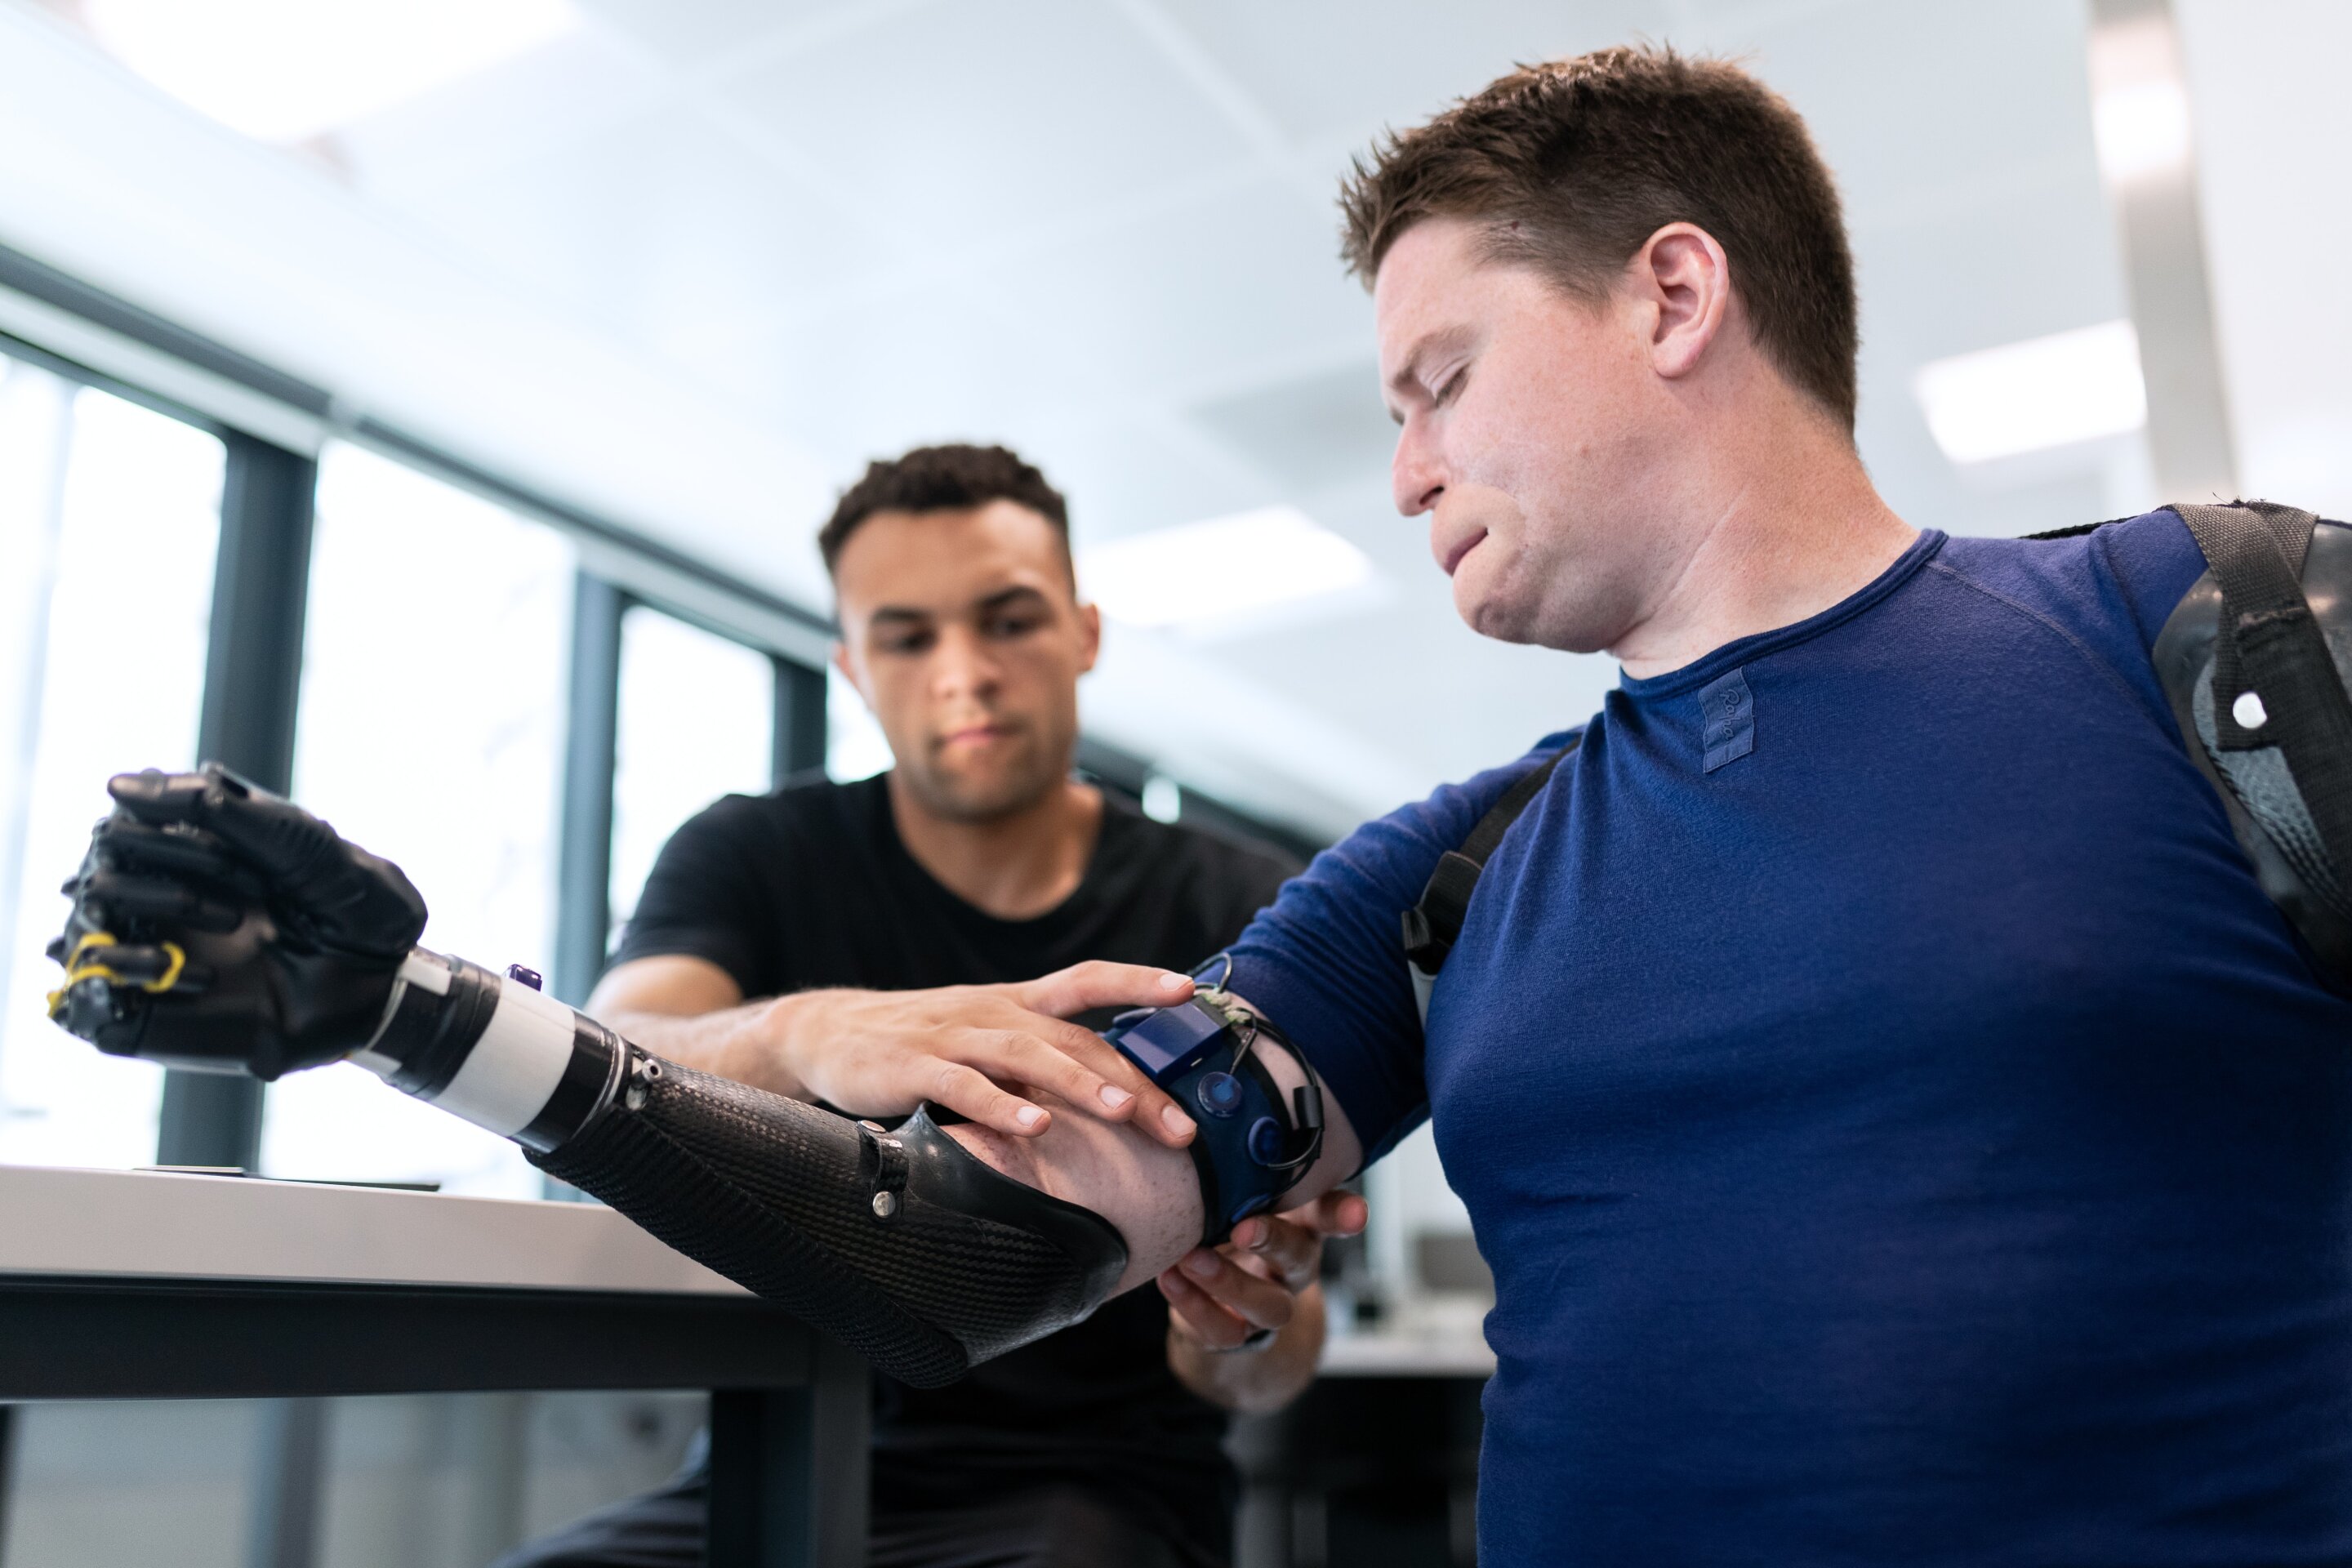 #Engineers light the way to nerve-operated prosthetics of the future